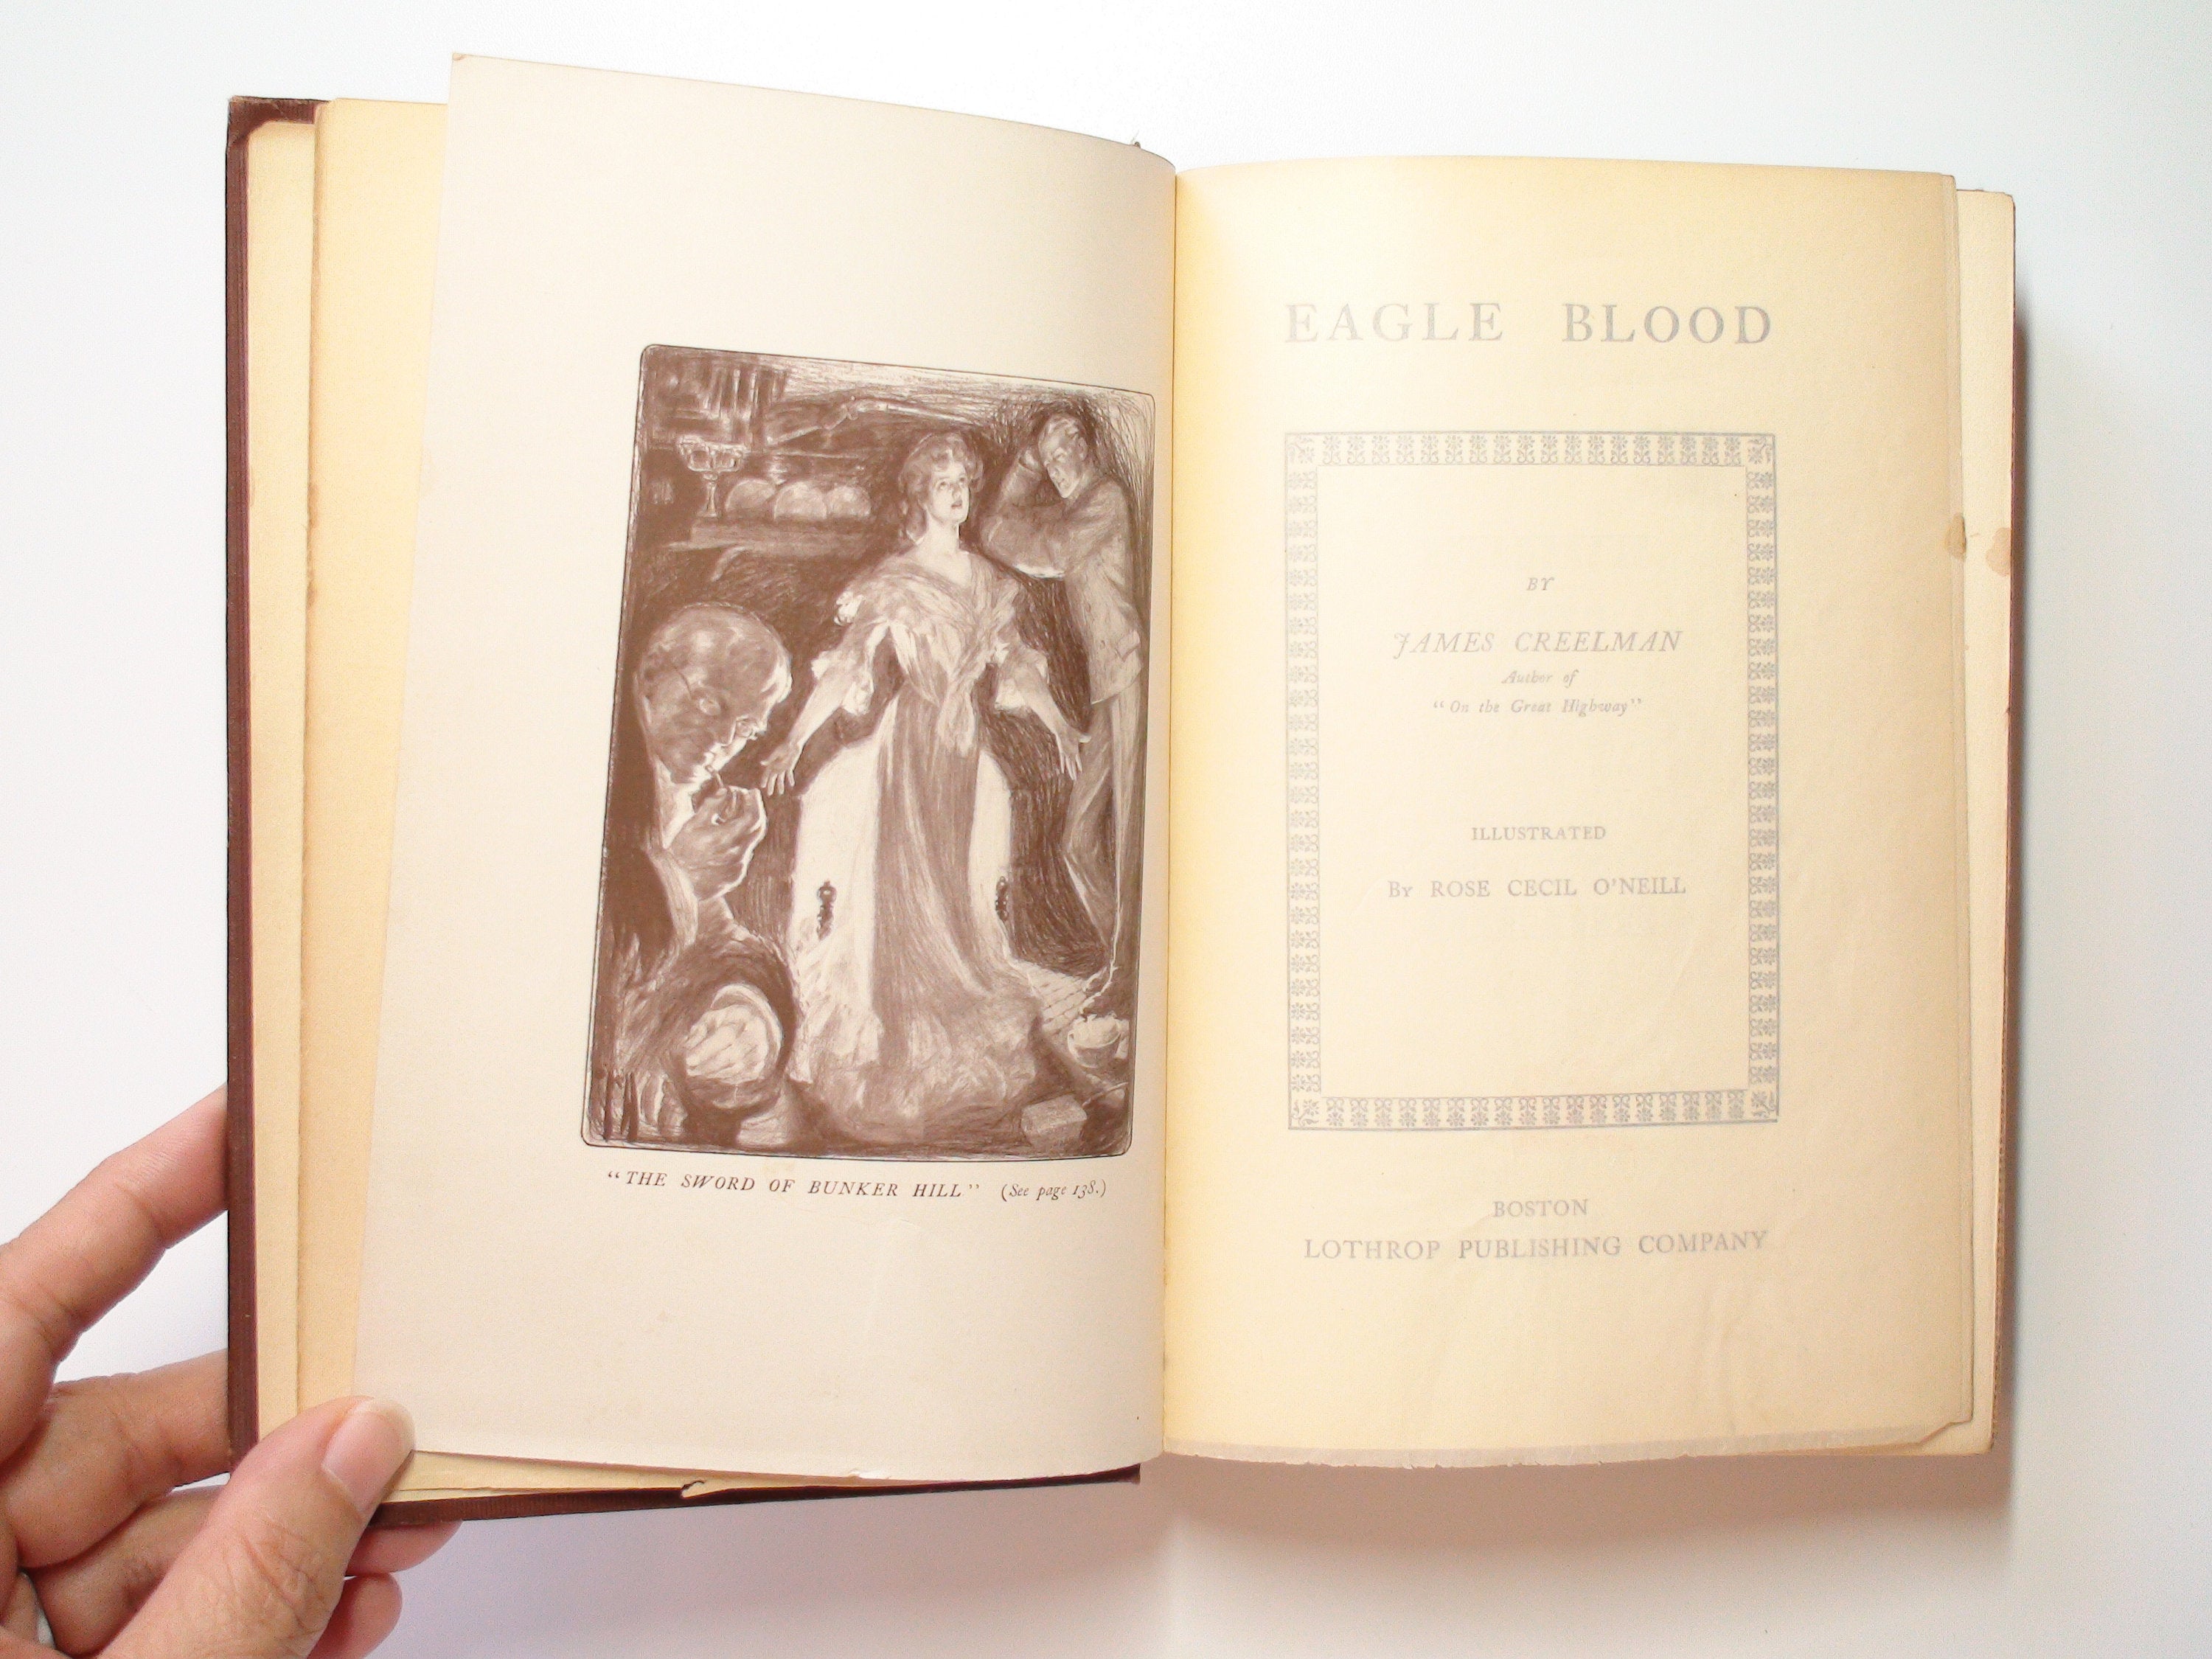 Eagle Blood, by James Creelman, Illustrated by Rose Cecil O'Neill, 1st Ed, 1902